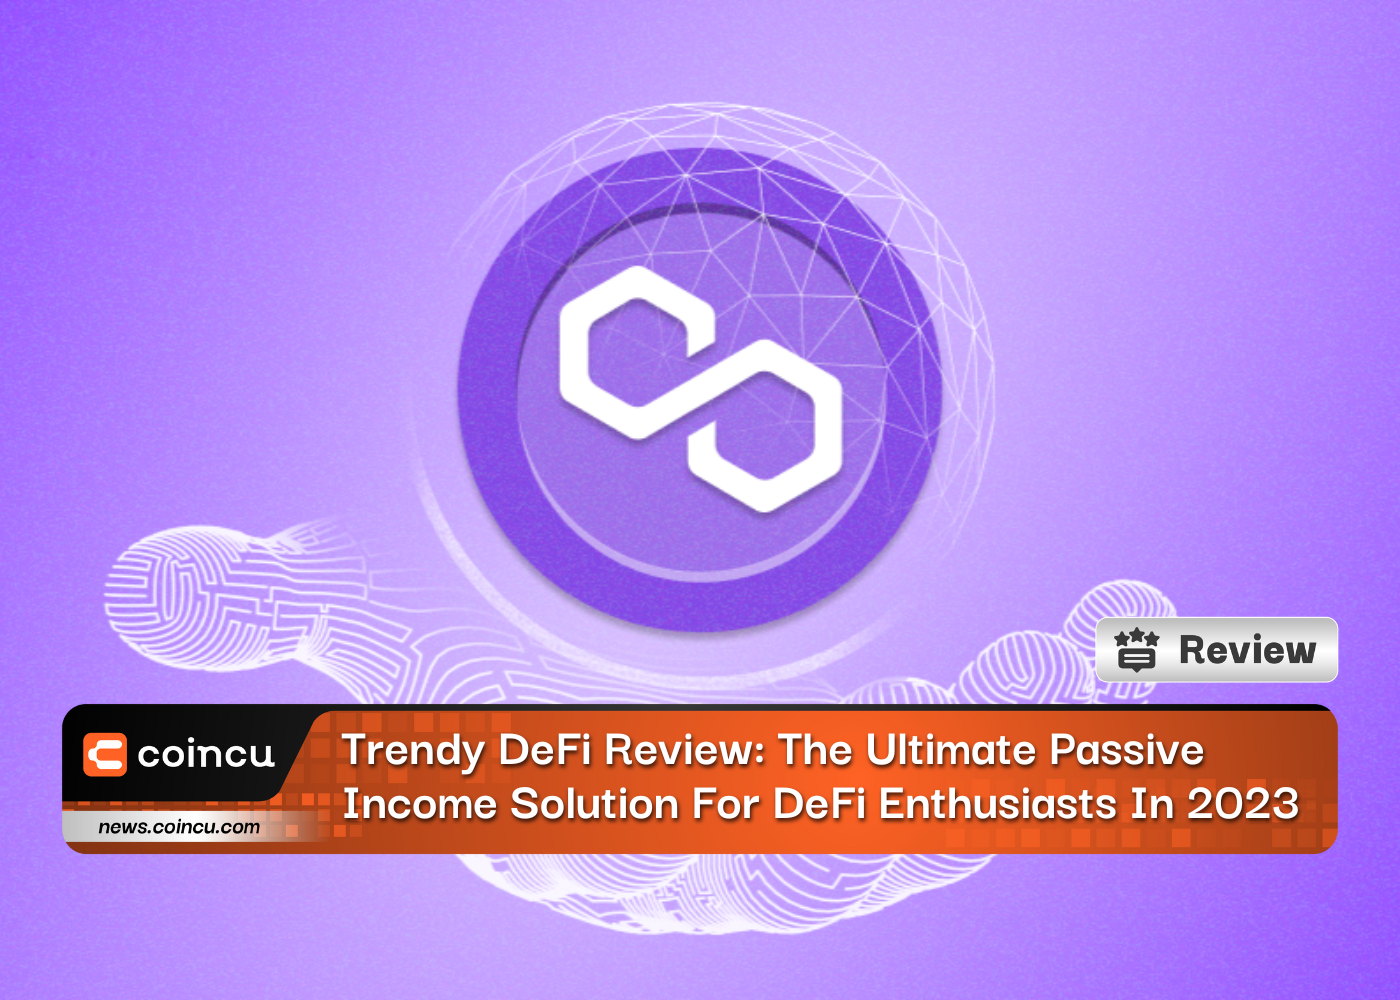 Trendy DeFi Review: The Ultimate Passive Income Solution For DeFi Enthusiasts In 2023